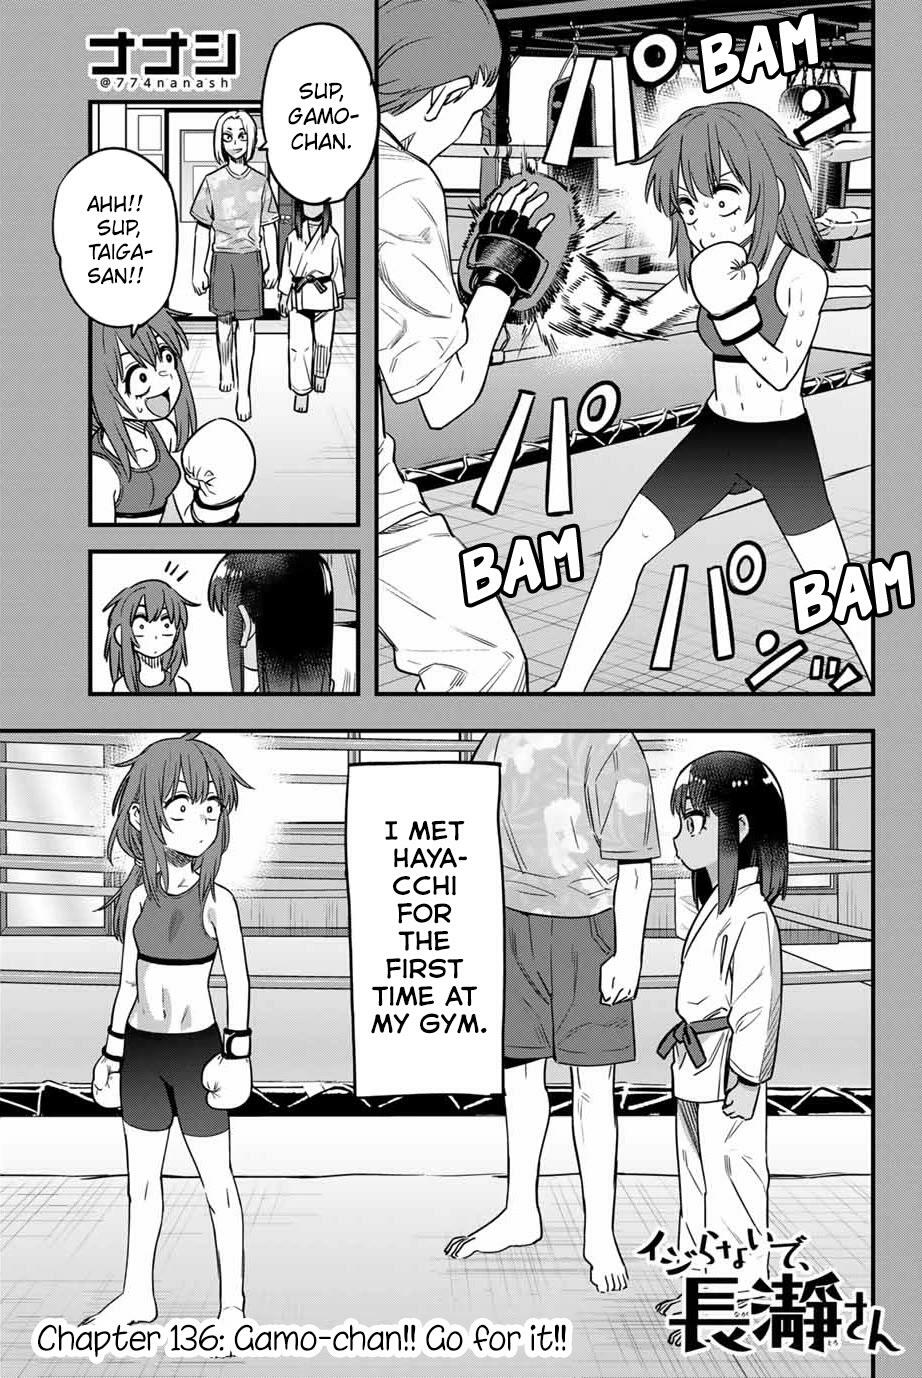 Don't Toy With Me, Miss Nagatoro, Chapter 101 - Don't Toy With Me, Miss  Nagatoro Manga Online